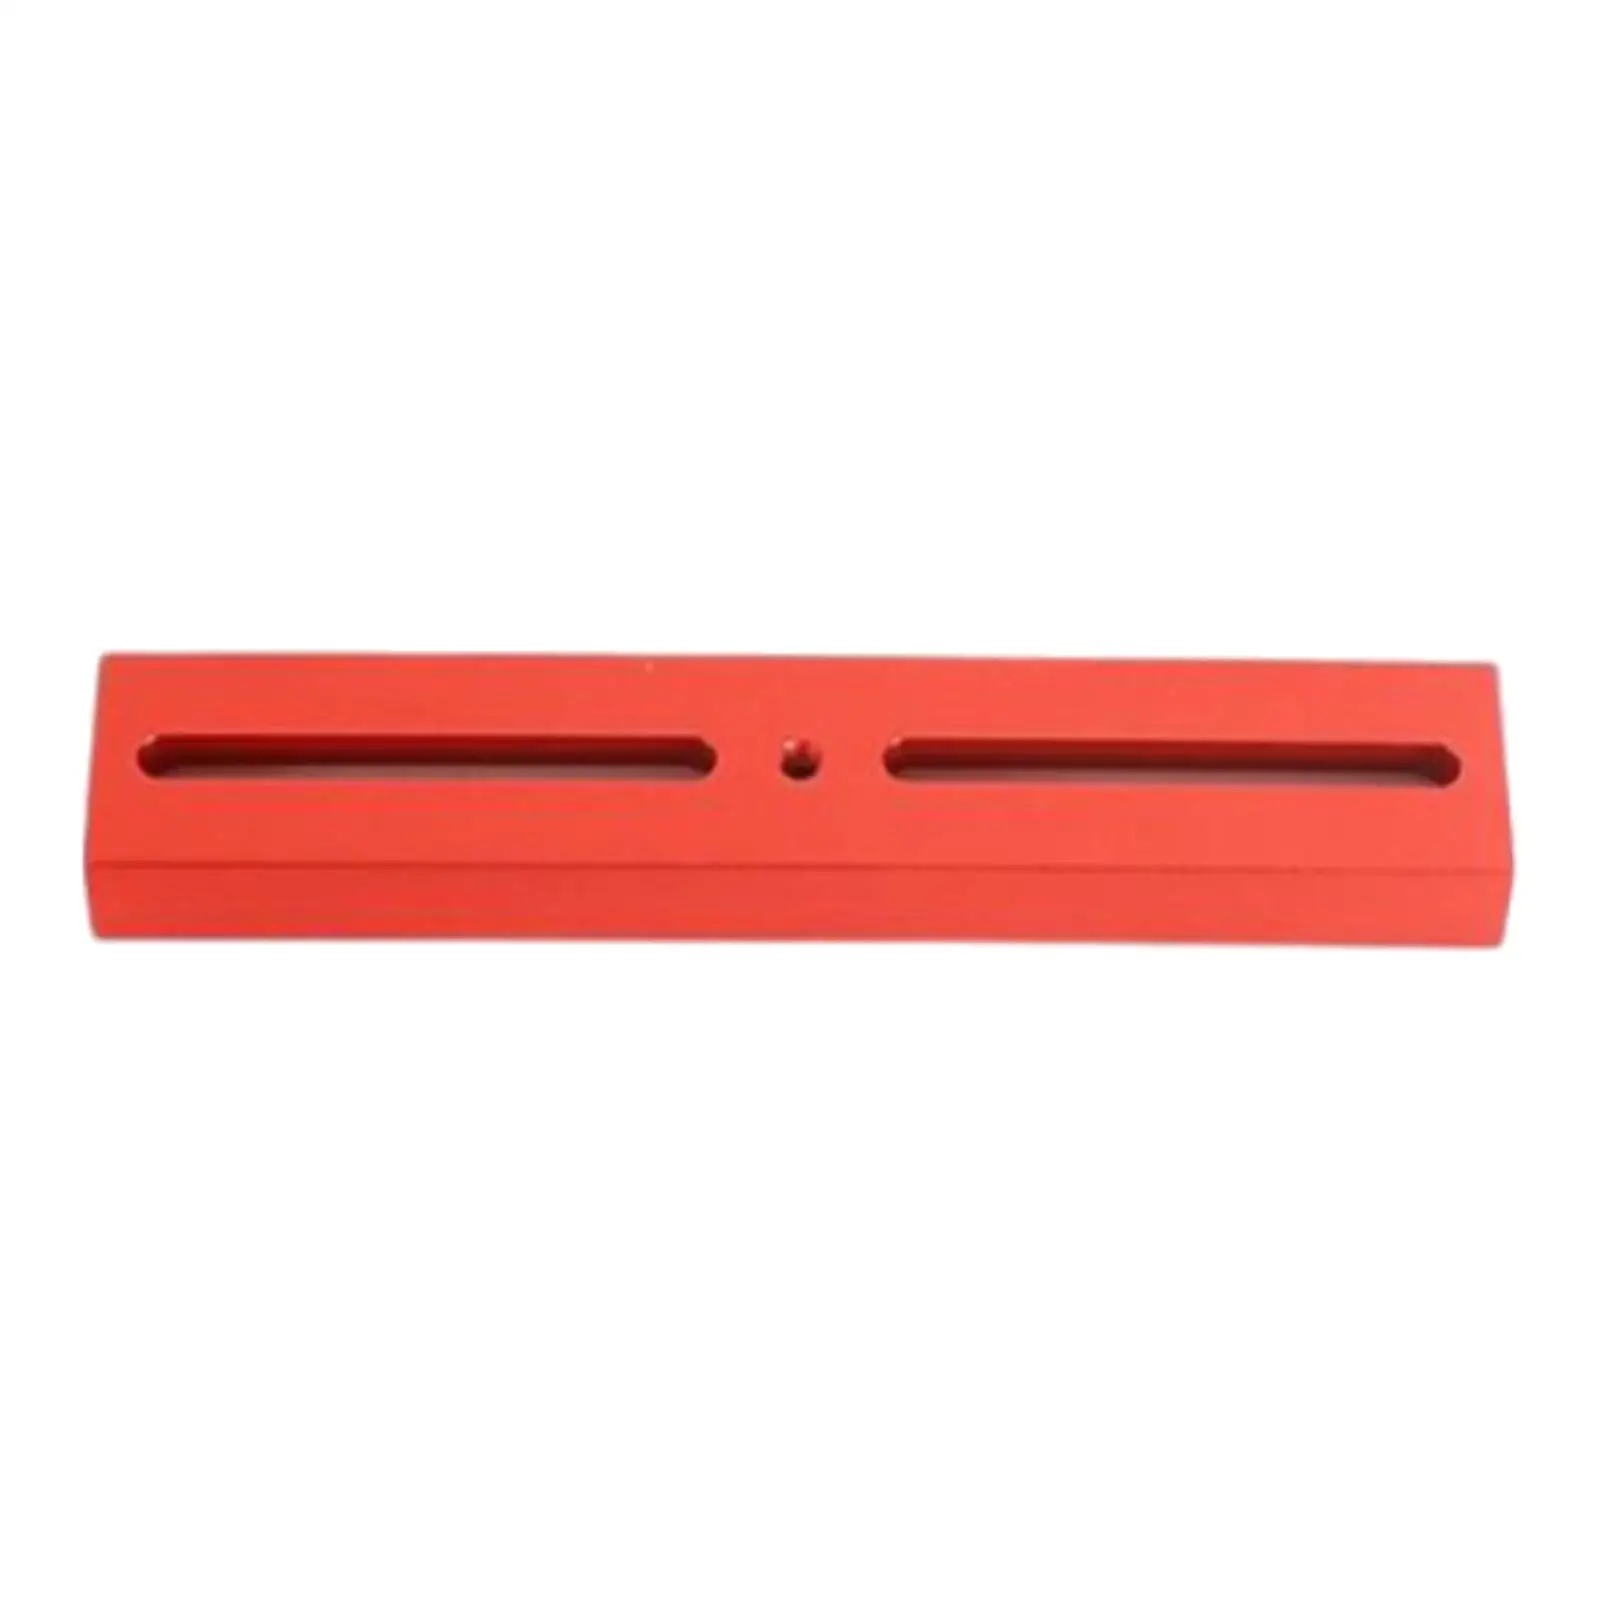 Dovetail Telescope Base Plate Durable Parts Dovetail Plate Mounting Bracket